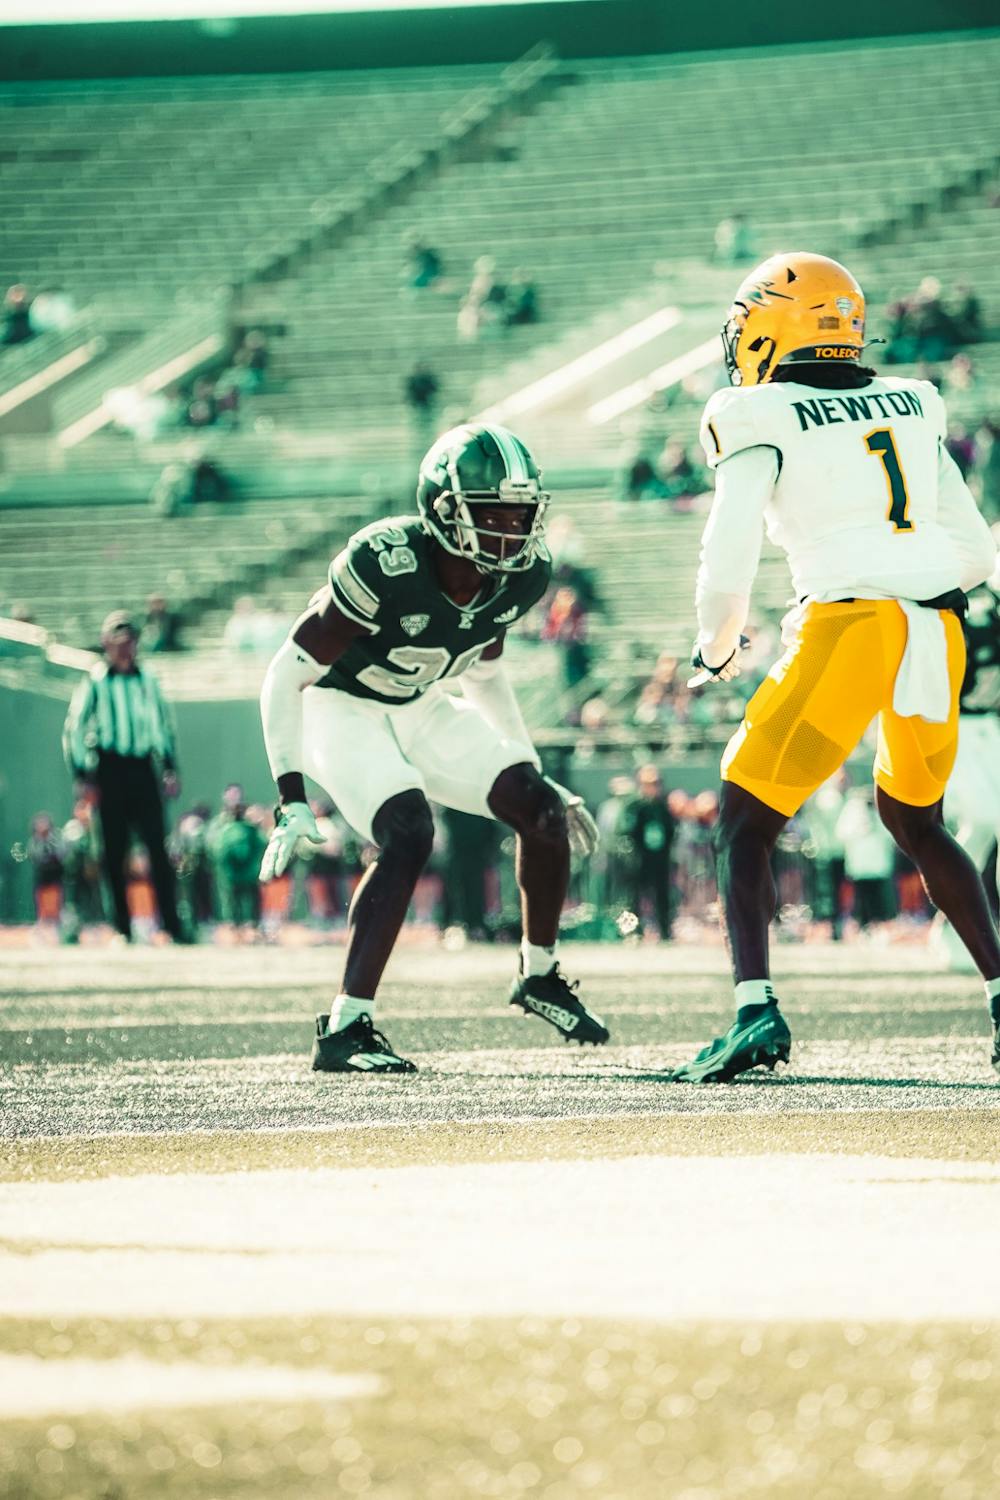 Eastern Michigan vs. Minnesota game preview, odds, what to watch for